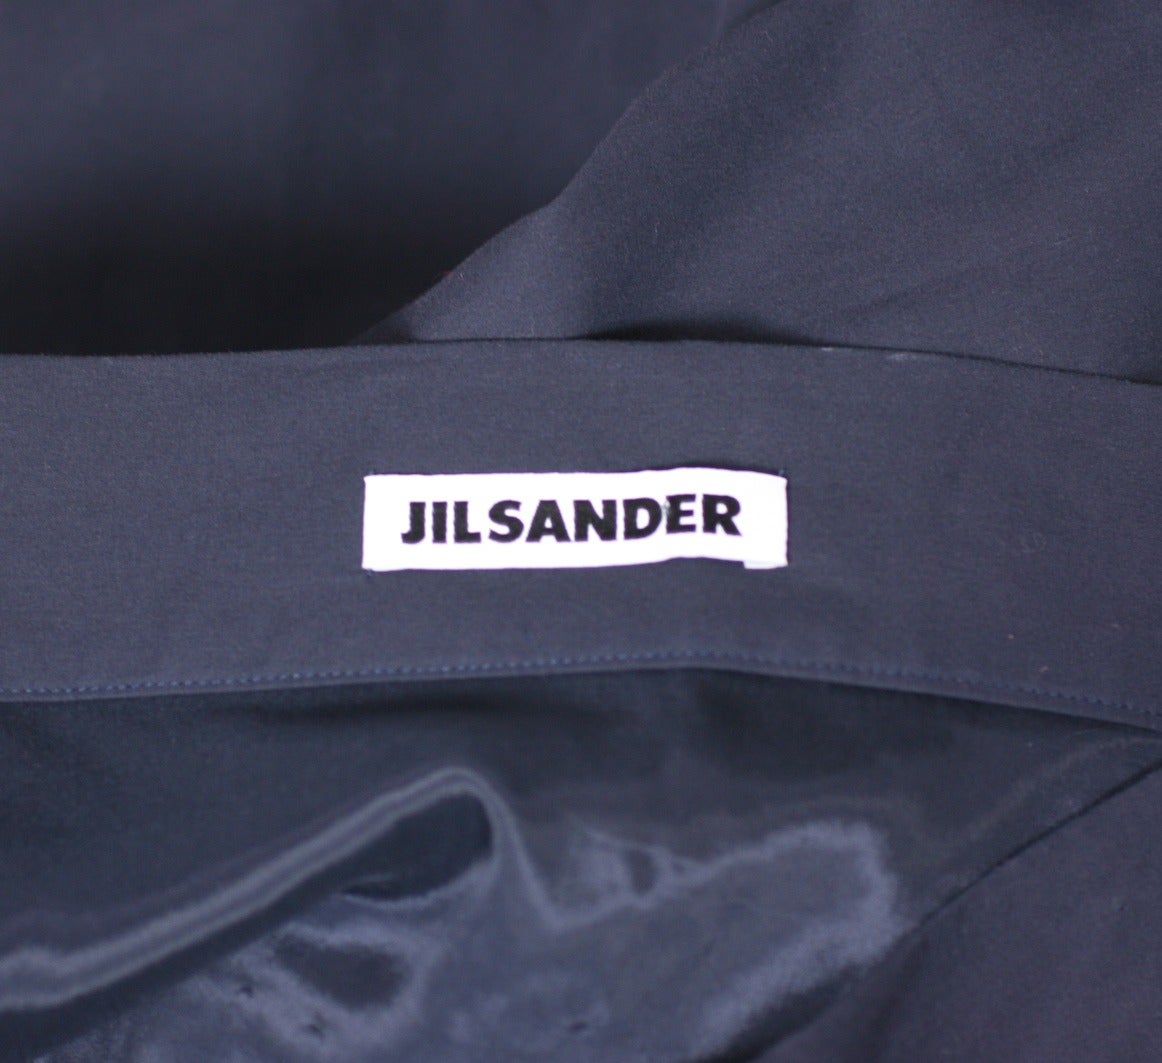 Jil Sander Minimalist Cotton Poplin Wrap Skirt In Excellent Condition For Sale In New York, NY